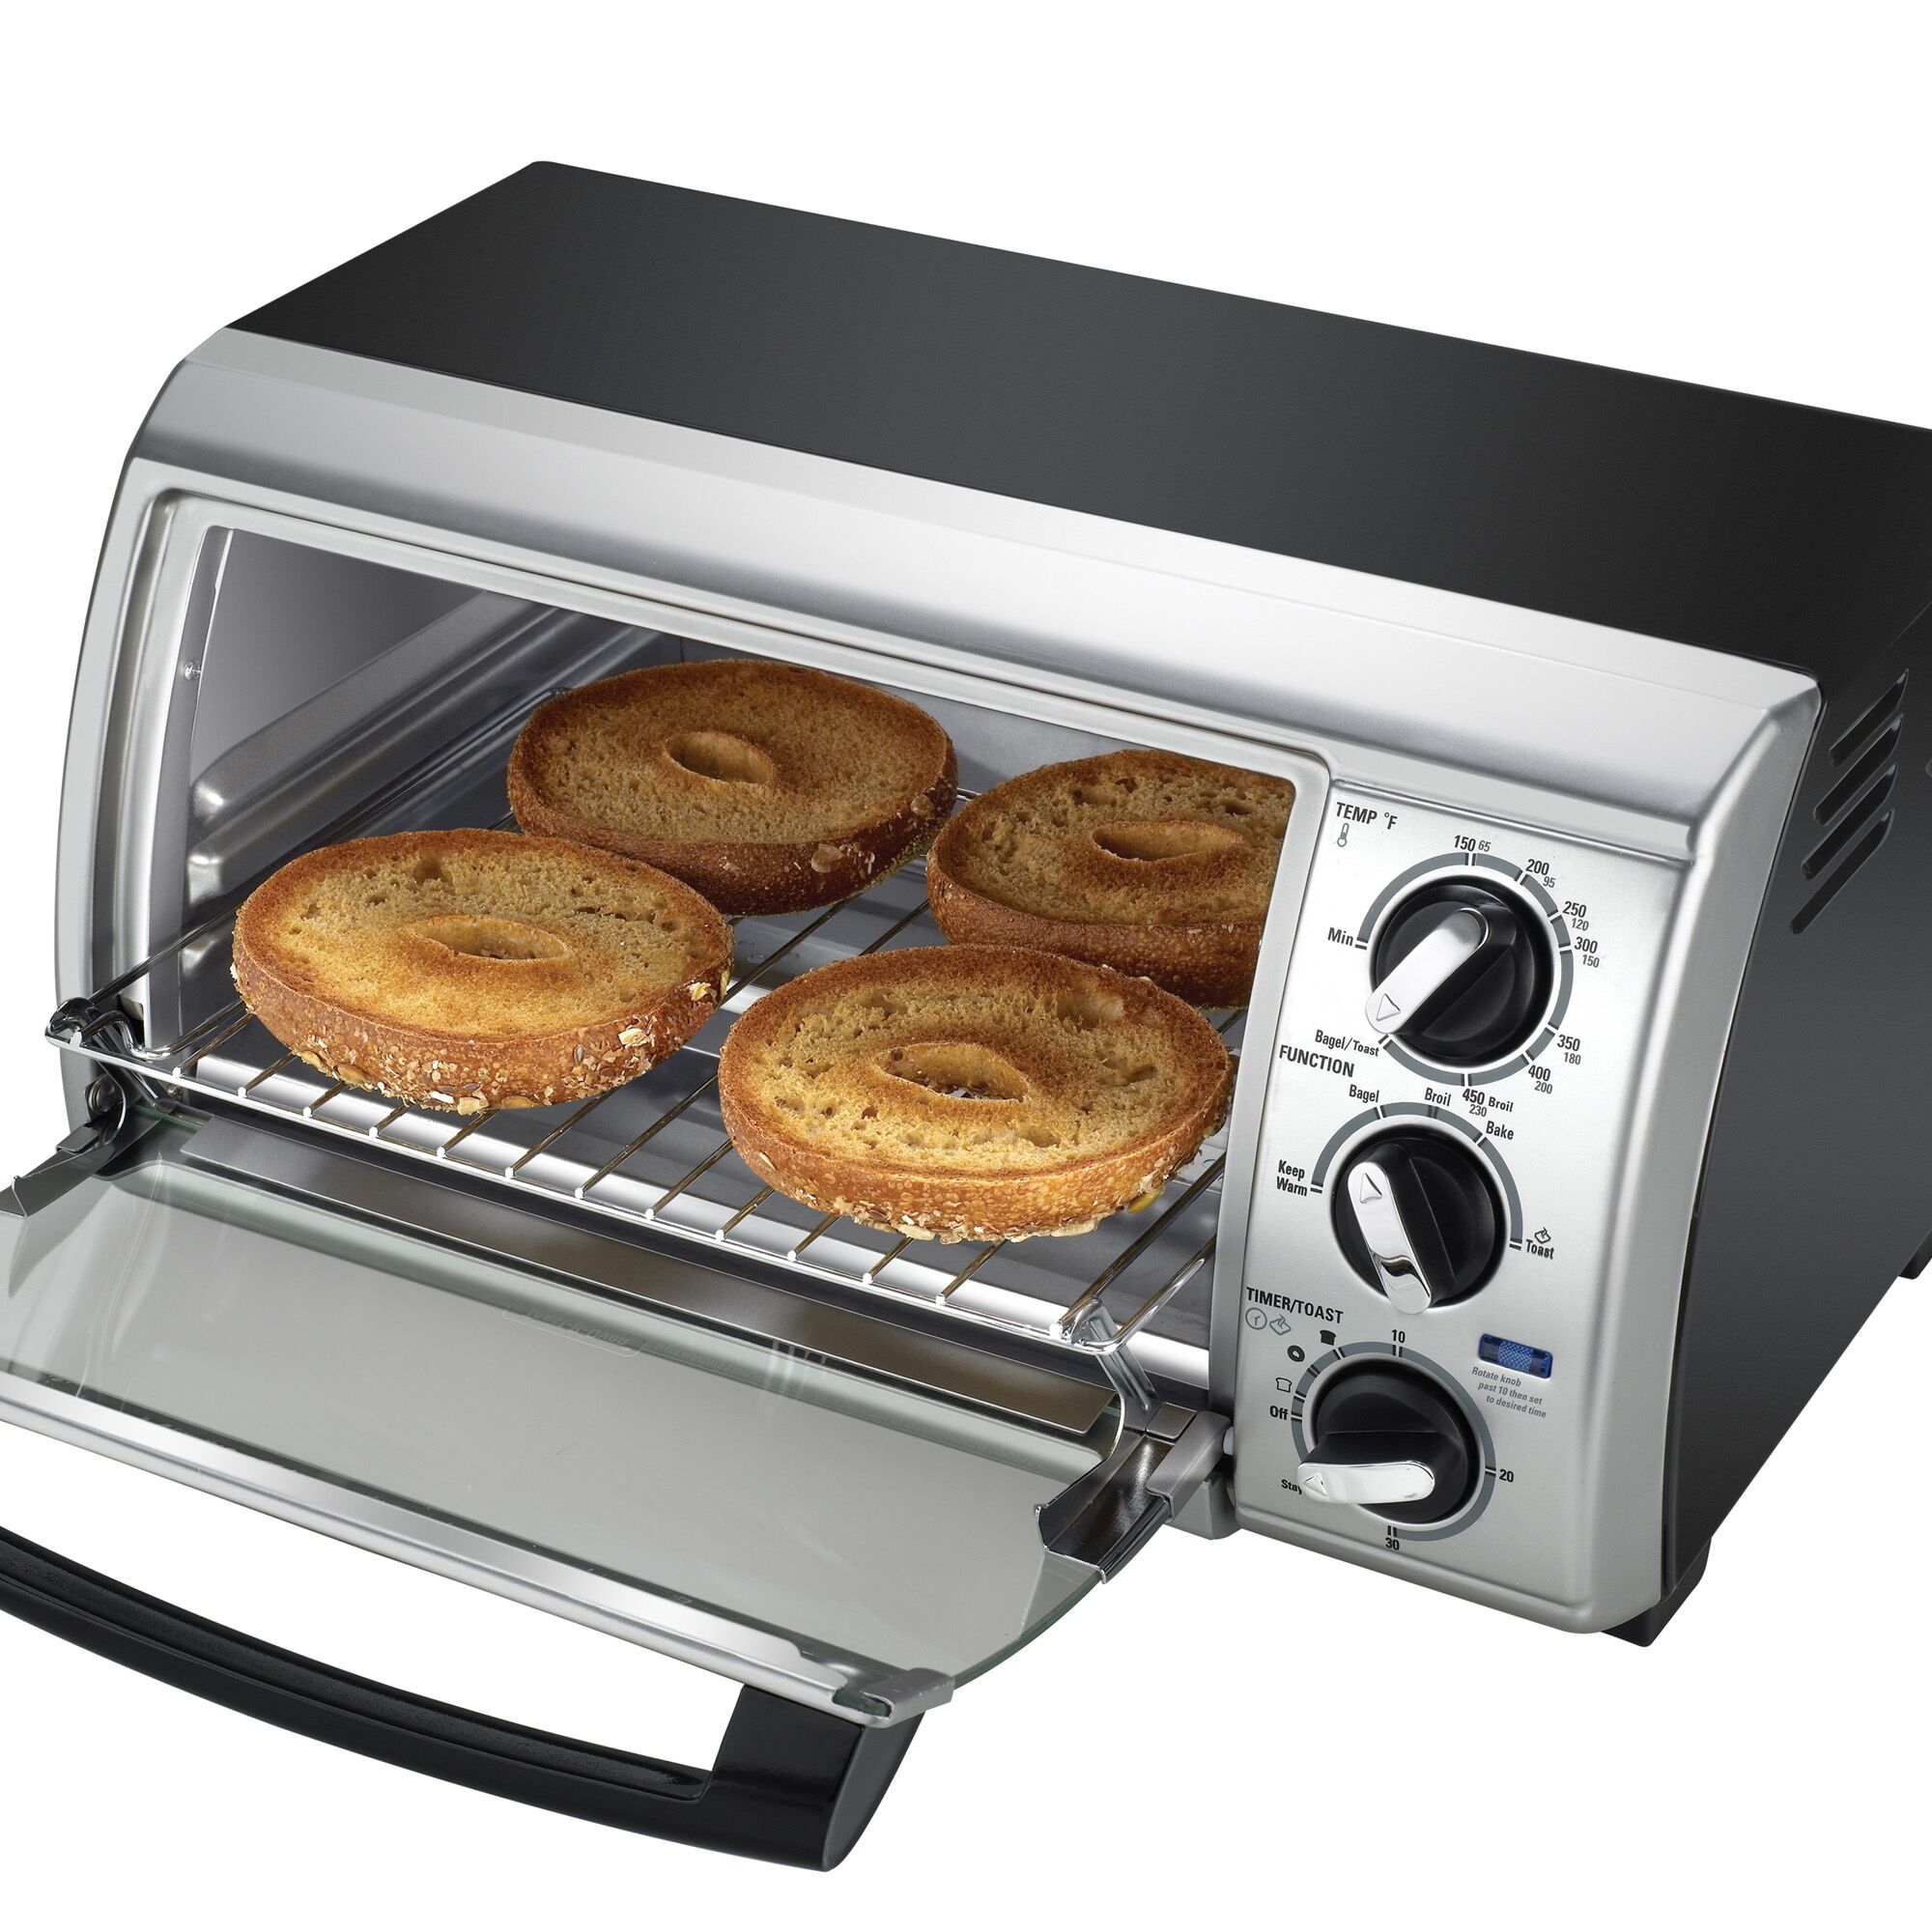 Countertop toaster oven.